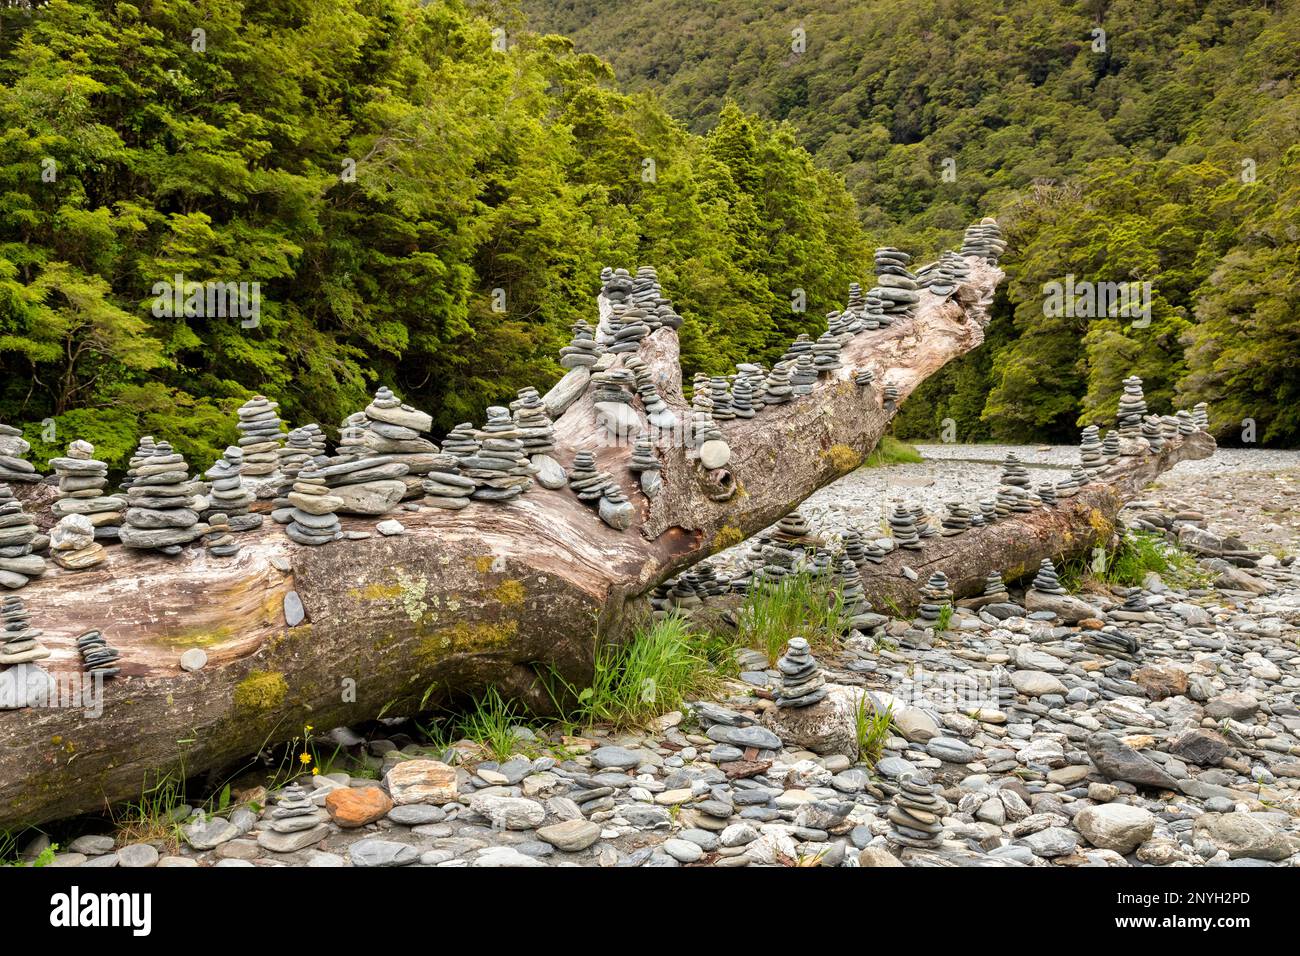 An old tree trunk in a river bed, which has been covered in stone cairns by tourists, near Fantail Falls, on the West Coast of the South Island, New... Stock Photo